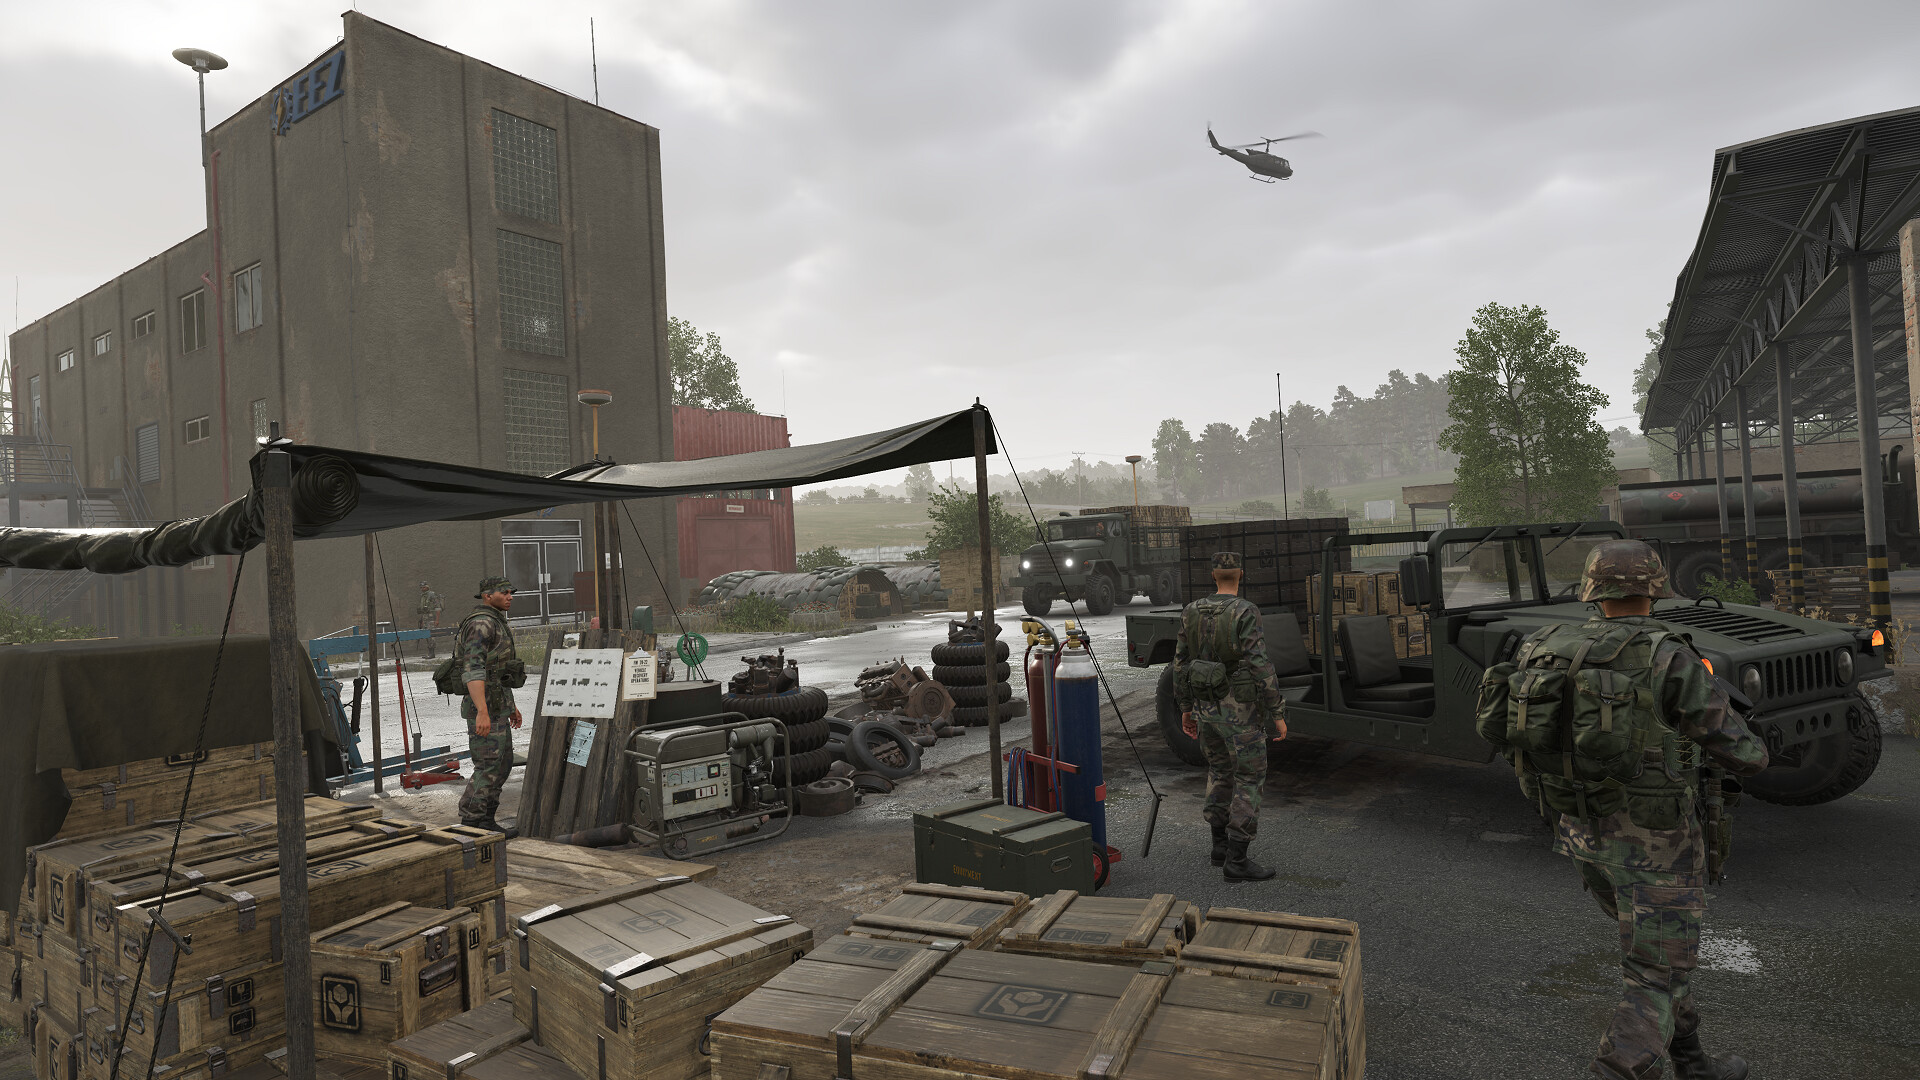 Arma III Officially Announced, Storyline, Key Features and Minimum System  Requirements Detailed